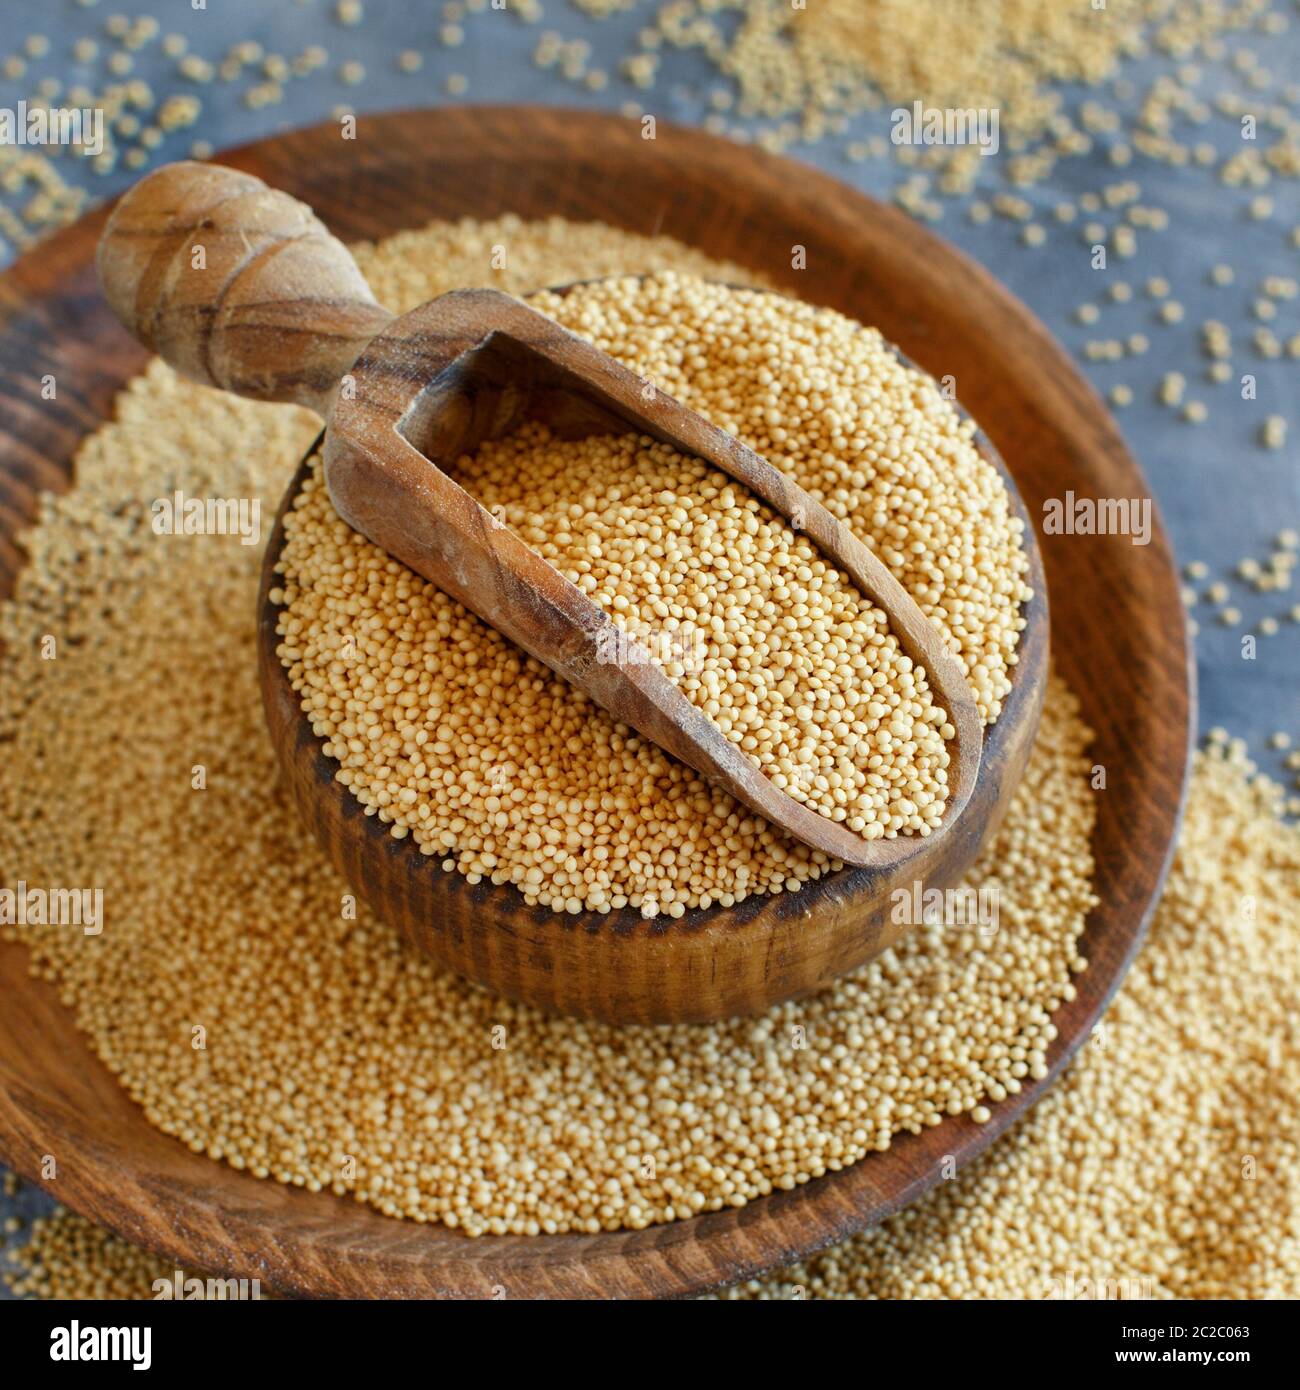 bowl of raw Amaranth Grain with a scoop close up Stock Photo